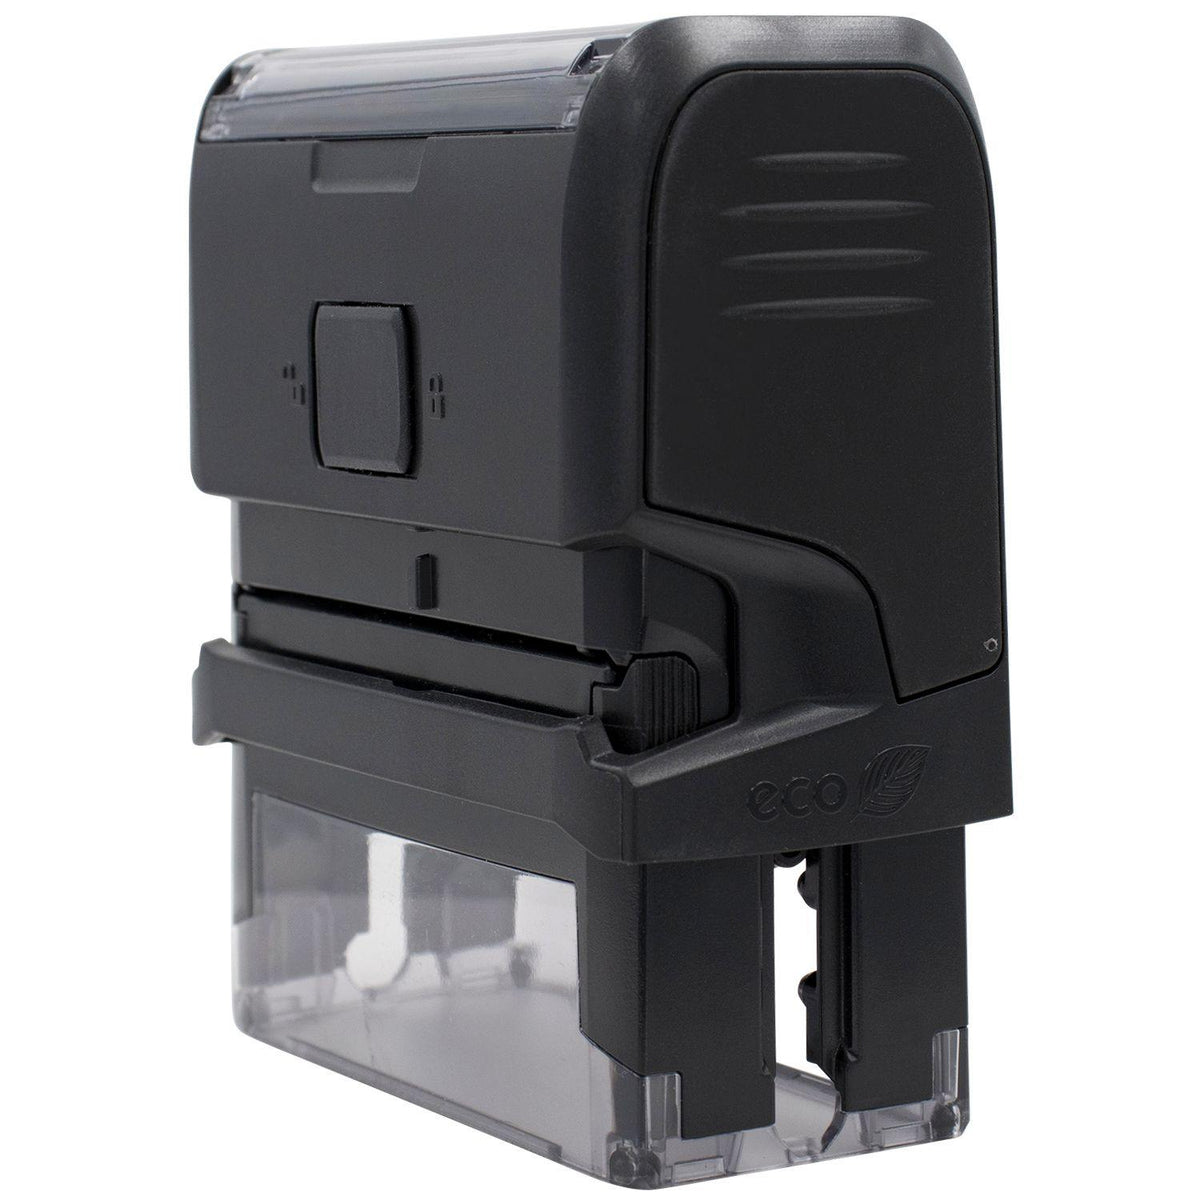 Large Self-Inking Economy Rate Stamp - Engineer Seal Stamps - Brand_Trodat, Impression Size_Large, Stamp Type_Self-Inking Stamp, Type of Use_Postal &amp; Mailing, Type of Use_Shipping &amp; Receiving